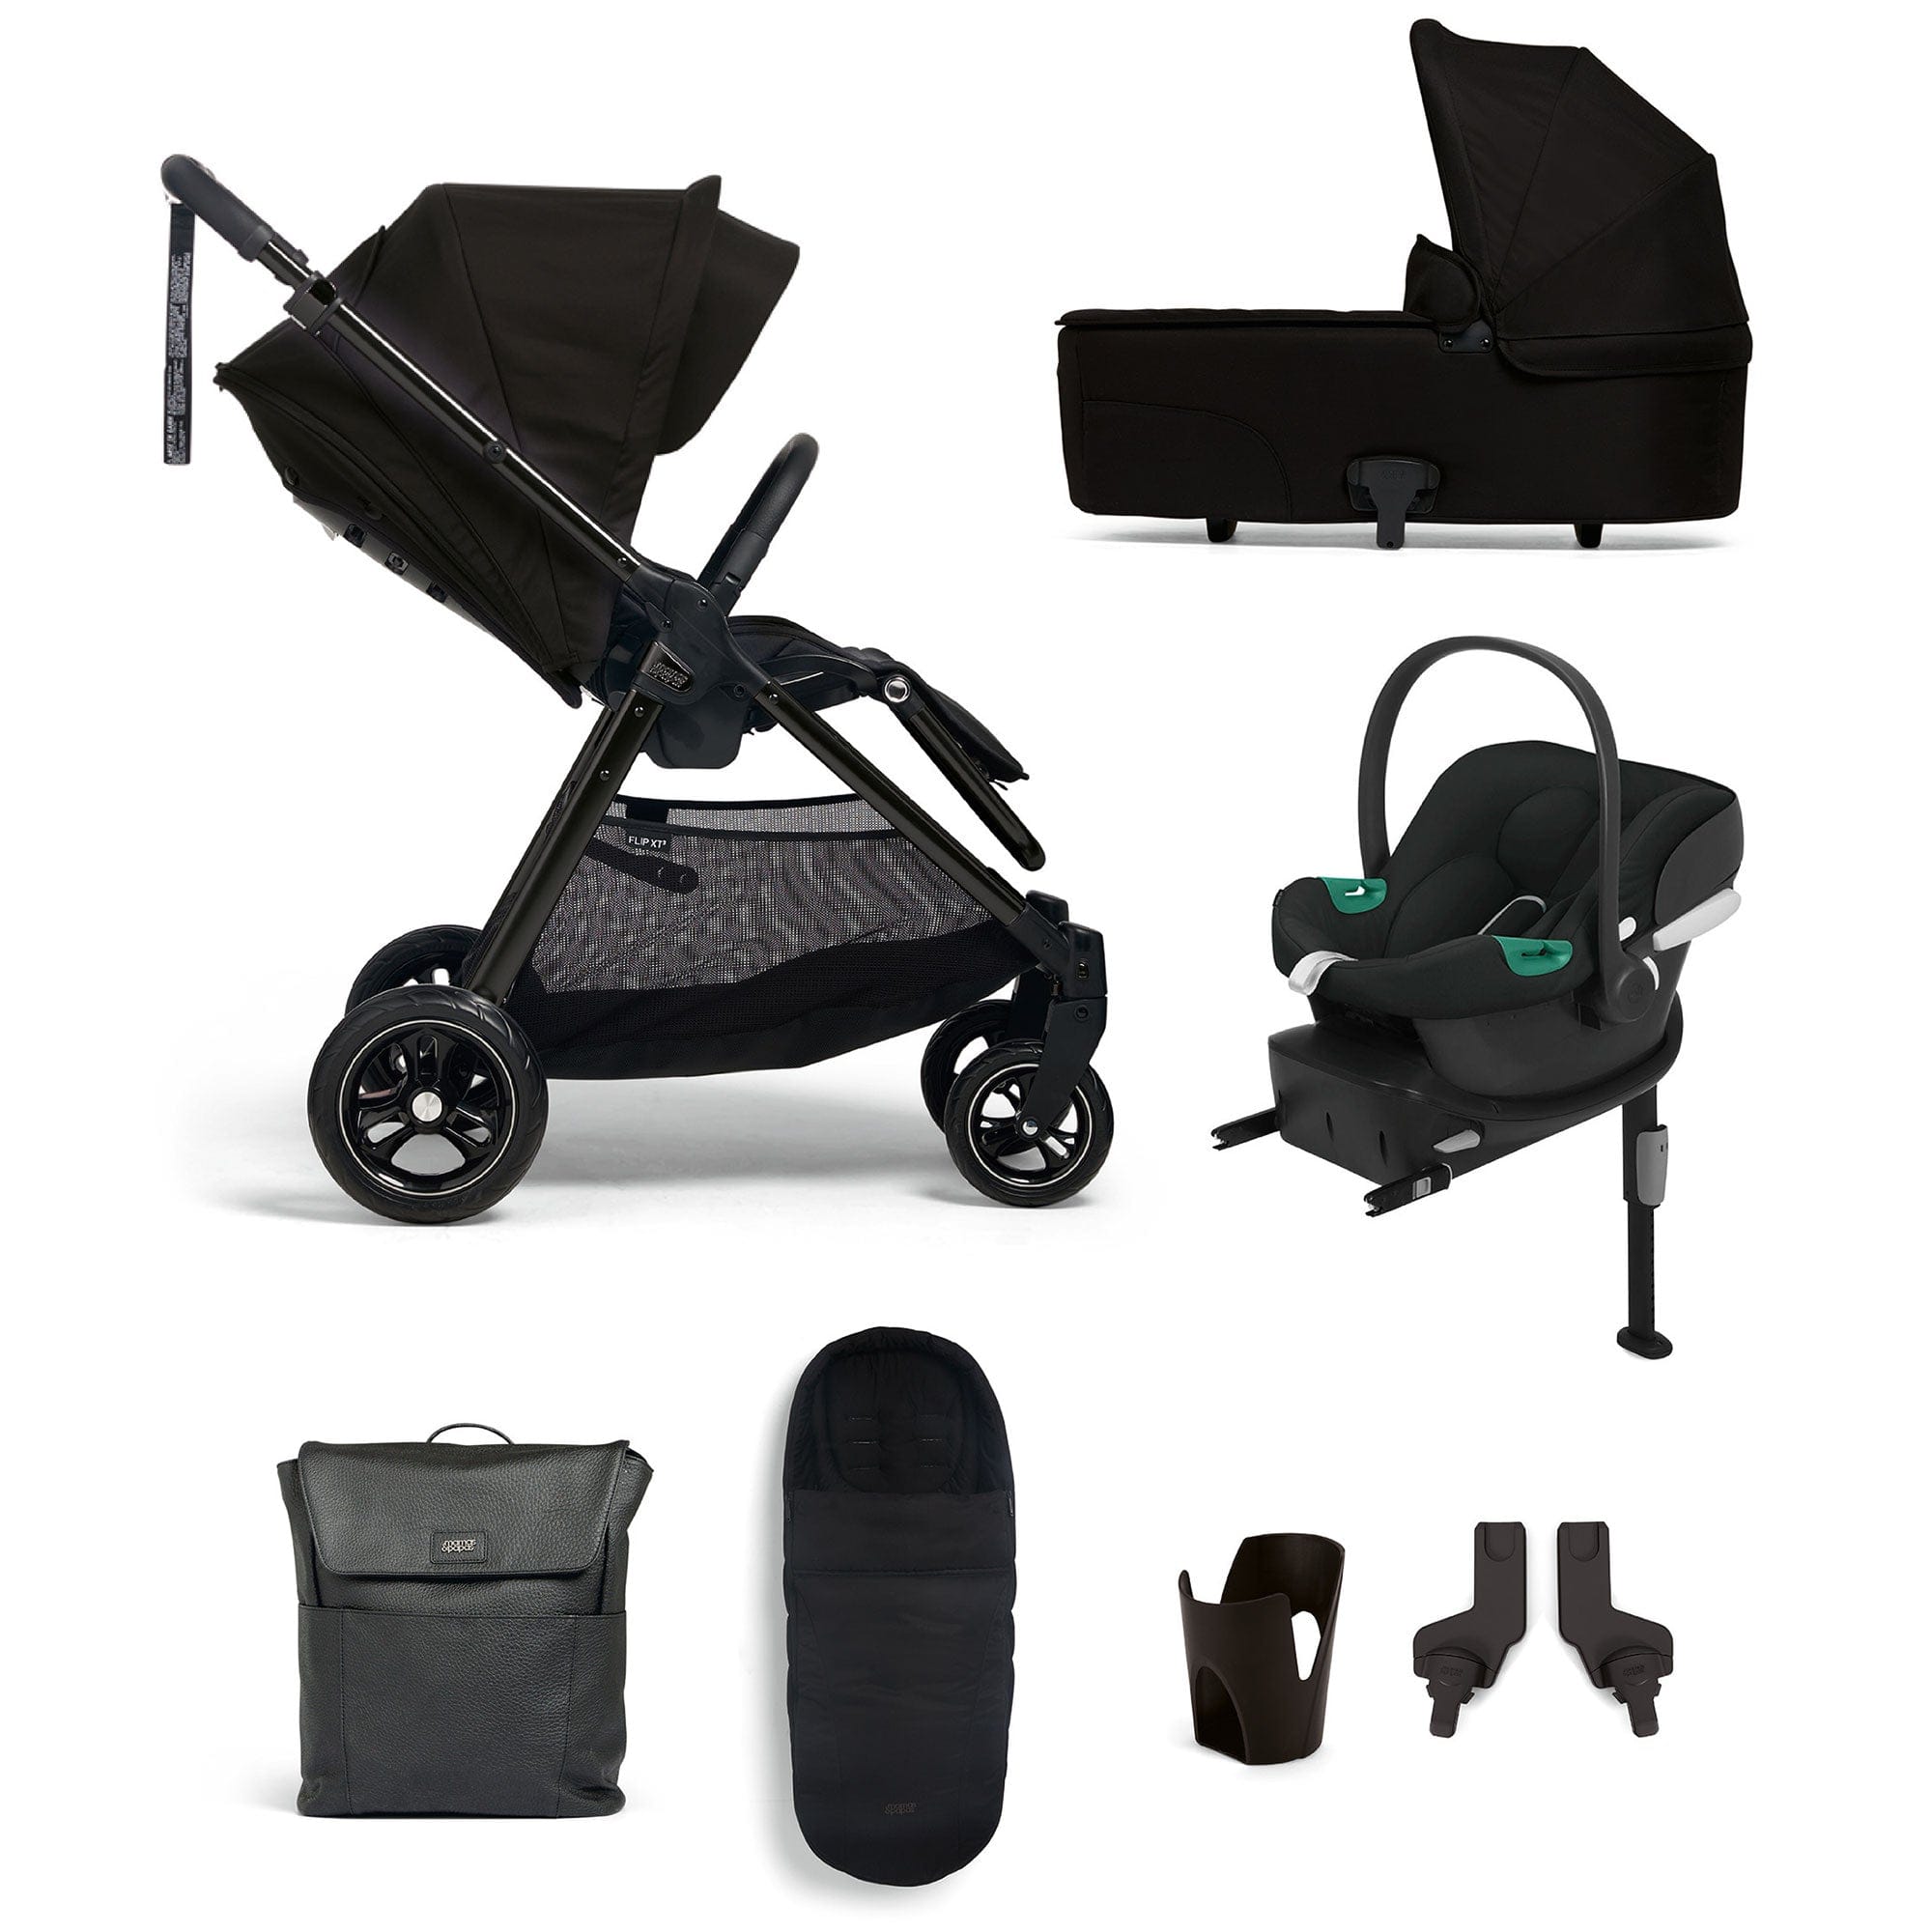 Mamas & Papas Flip XT³ 8 Piece Essentials Bundle with Car Seat in Ink Travel Systems 61941NK00 5063229087356